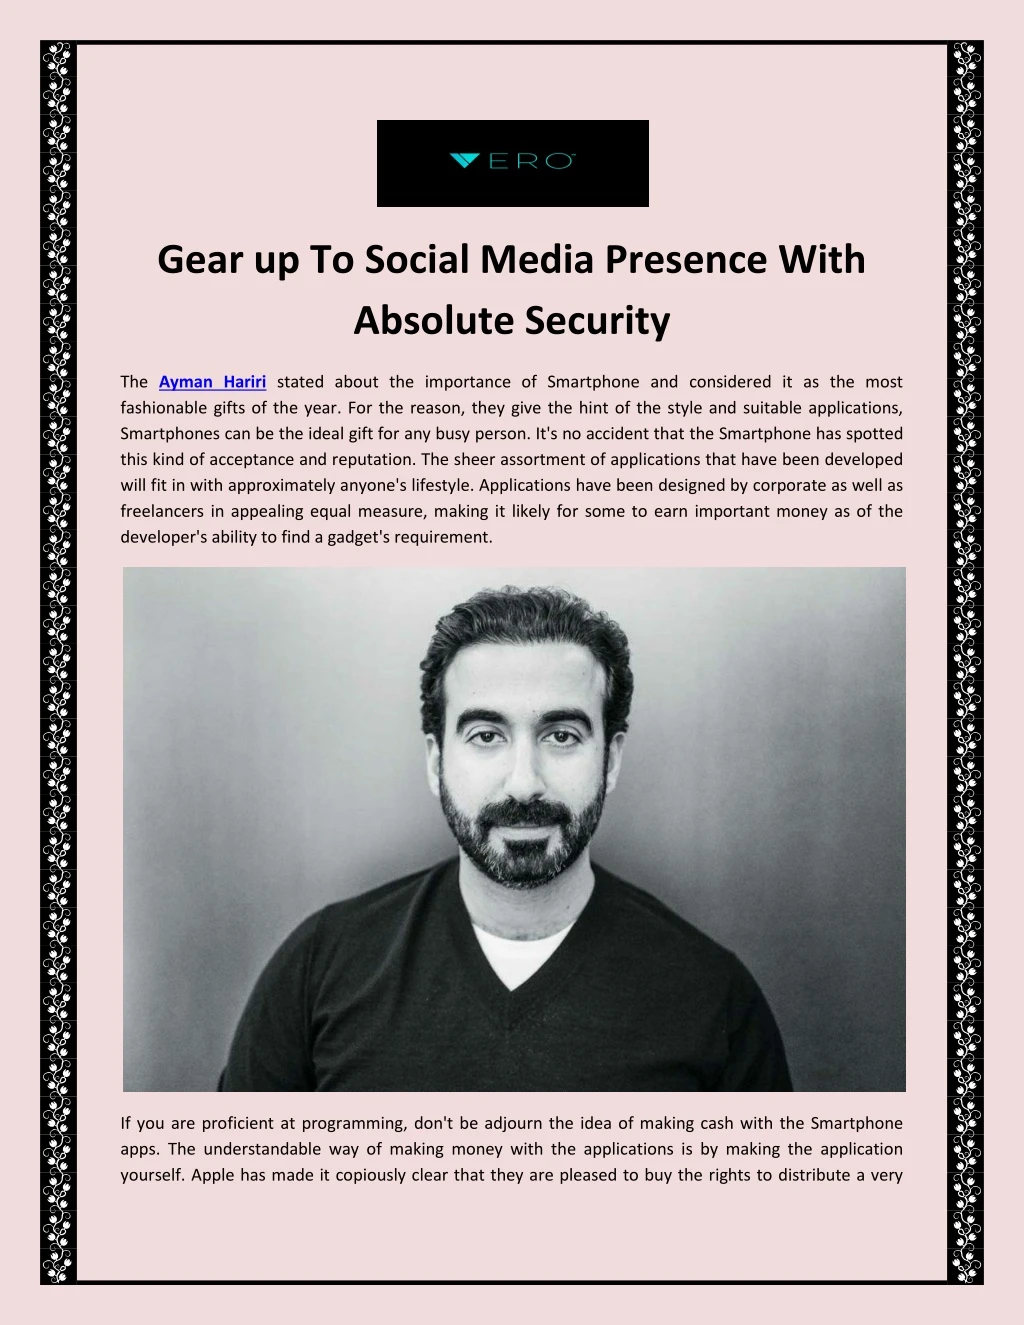 gear up to social media presence with absolute